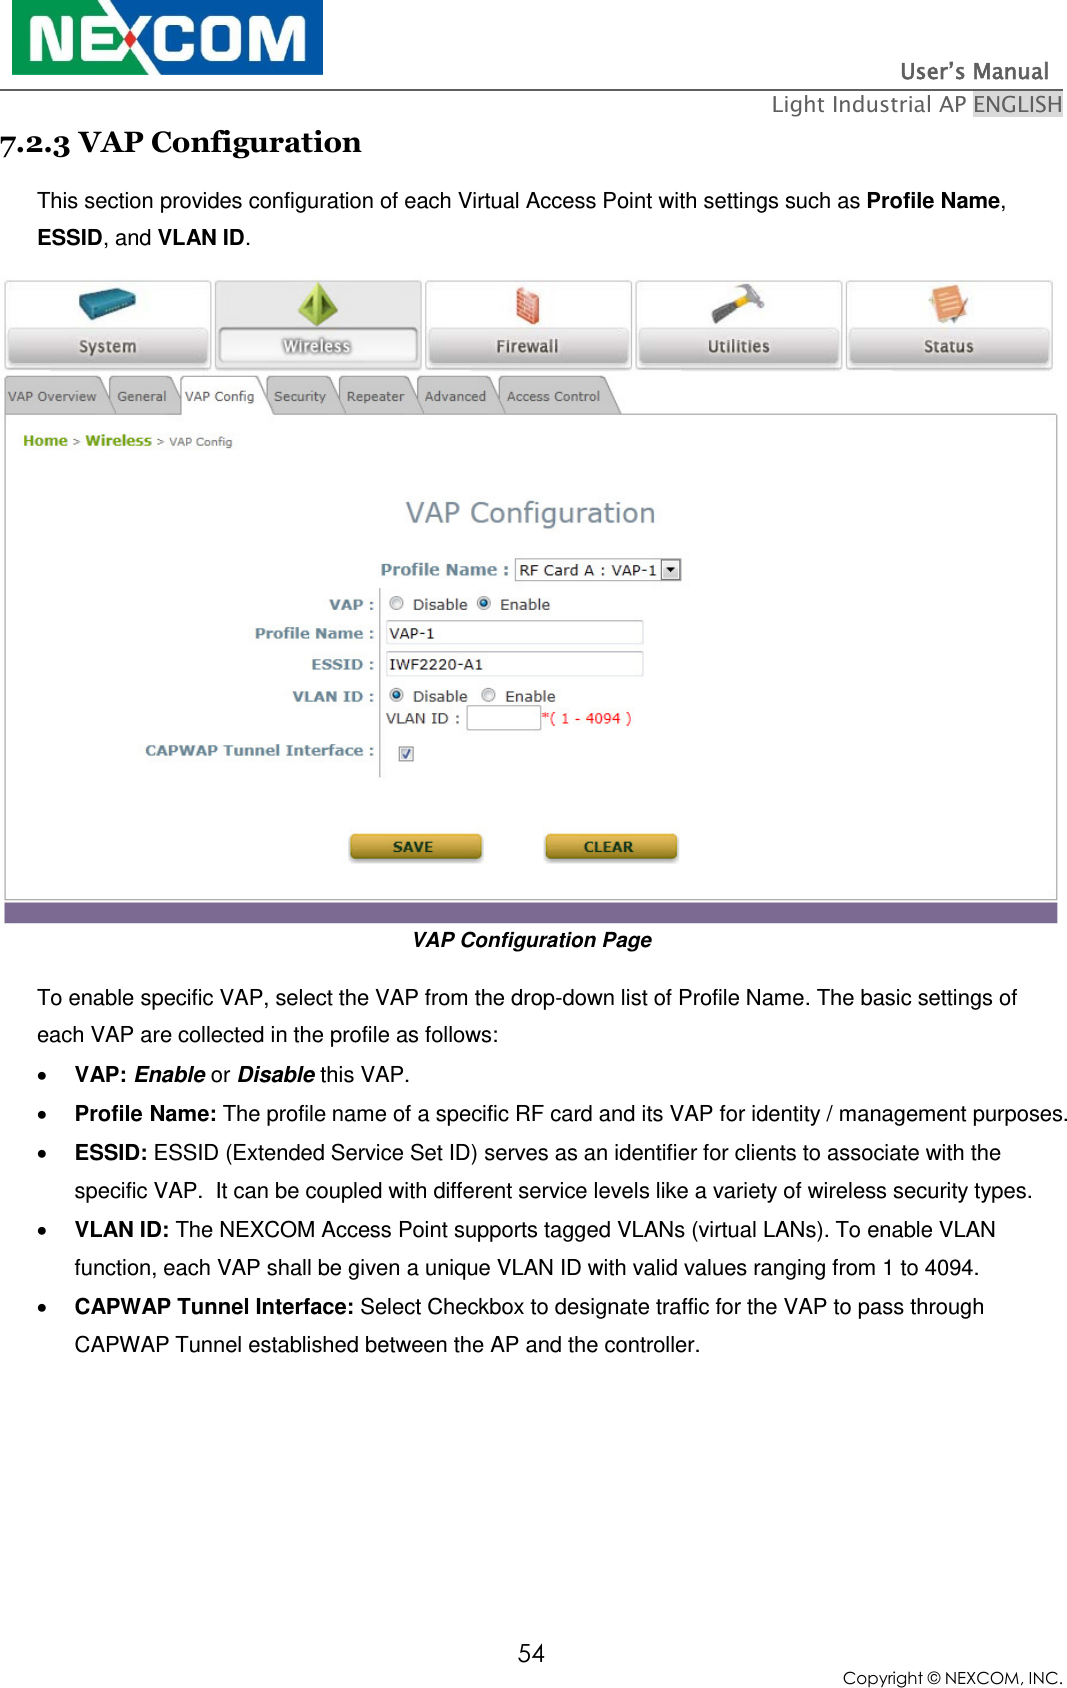                                                                          User’s Manual   Light Industrial AP ENGLISH 54 Copyright © NEXCOM, INC. 7.2.3 VAP Configuration This section provides configuration of each Virtual Access Point with settings such as Profile Name, ESSID, and VLAN ID. VAP Configuration Page To enable specific VAP, select the VAP from the drop-down list of Profile Name. The basic settings of each VAP are collected in the profile as follows:  VAP: Enable or Disable this VAP.  Profile Name: The profile name of a specific RF card and its VAP for identity / management purposes.  ESSID: ESSID (Extended Service Set ID) serves as an identifier for clients to associate with the specific VAP.  It can be coupled with different service levels like a variety of wireless security types.  VLAN ID: The NEXCOM Access Point supports tagged VLANs (virtual LANs). To enable VLAN function, each VAP shall be given a unique VLAN ID with valid values ranging from 1 to 4094.  CAPWAP Tunnel Interface: Select Checkbox to designate traffic for the VAP to pass through CAPWAP Tunnel established between the AP and the controller.   